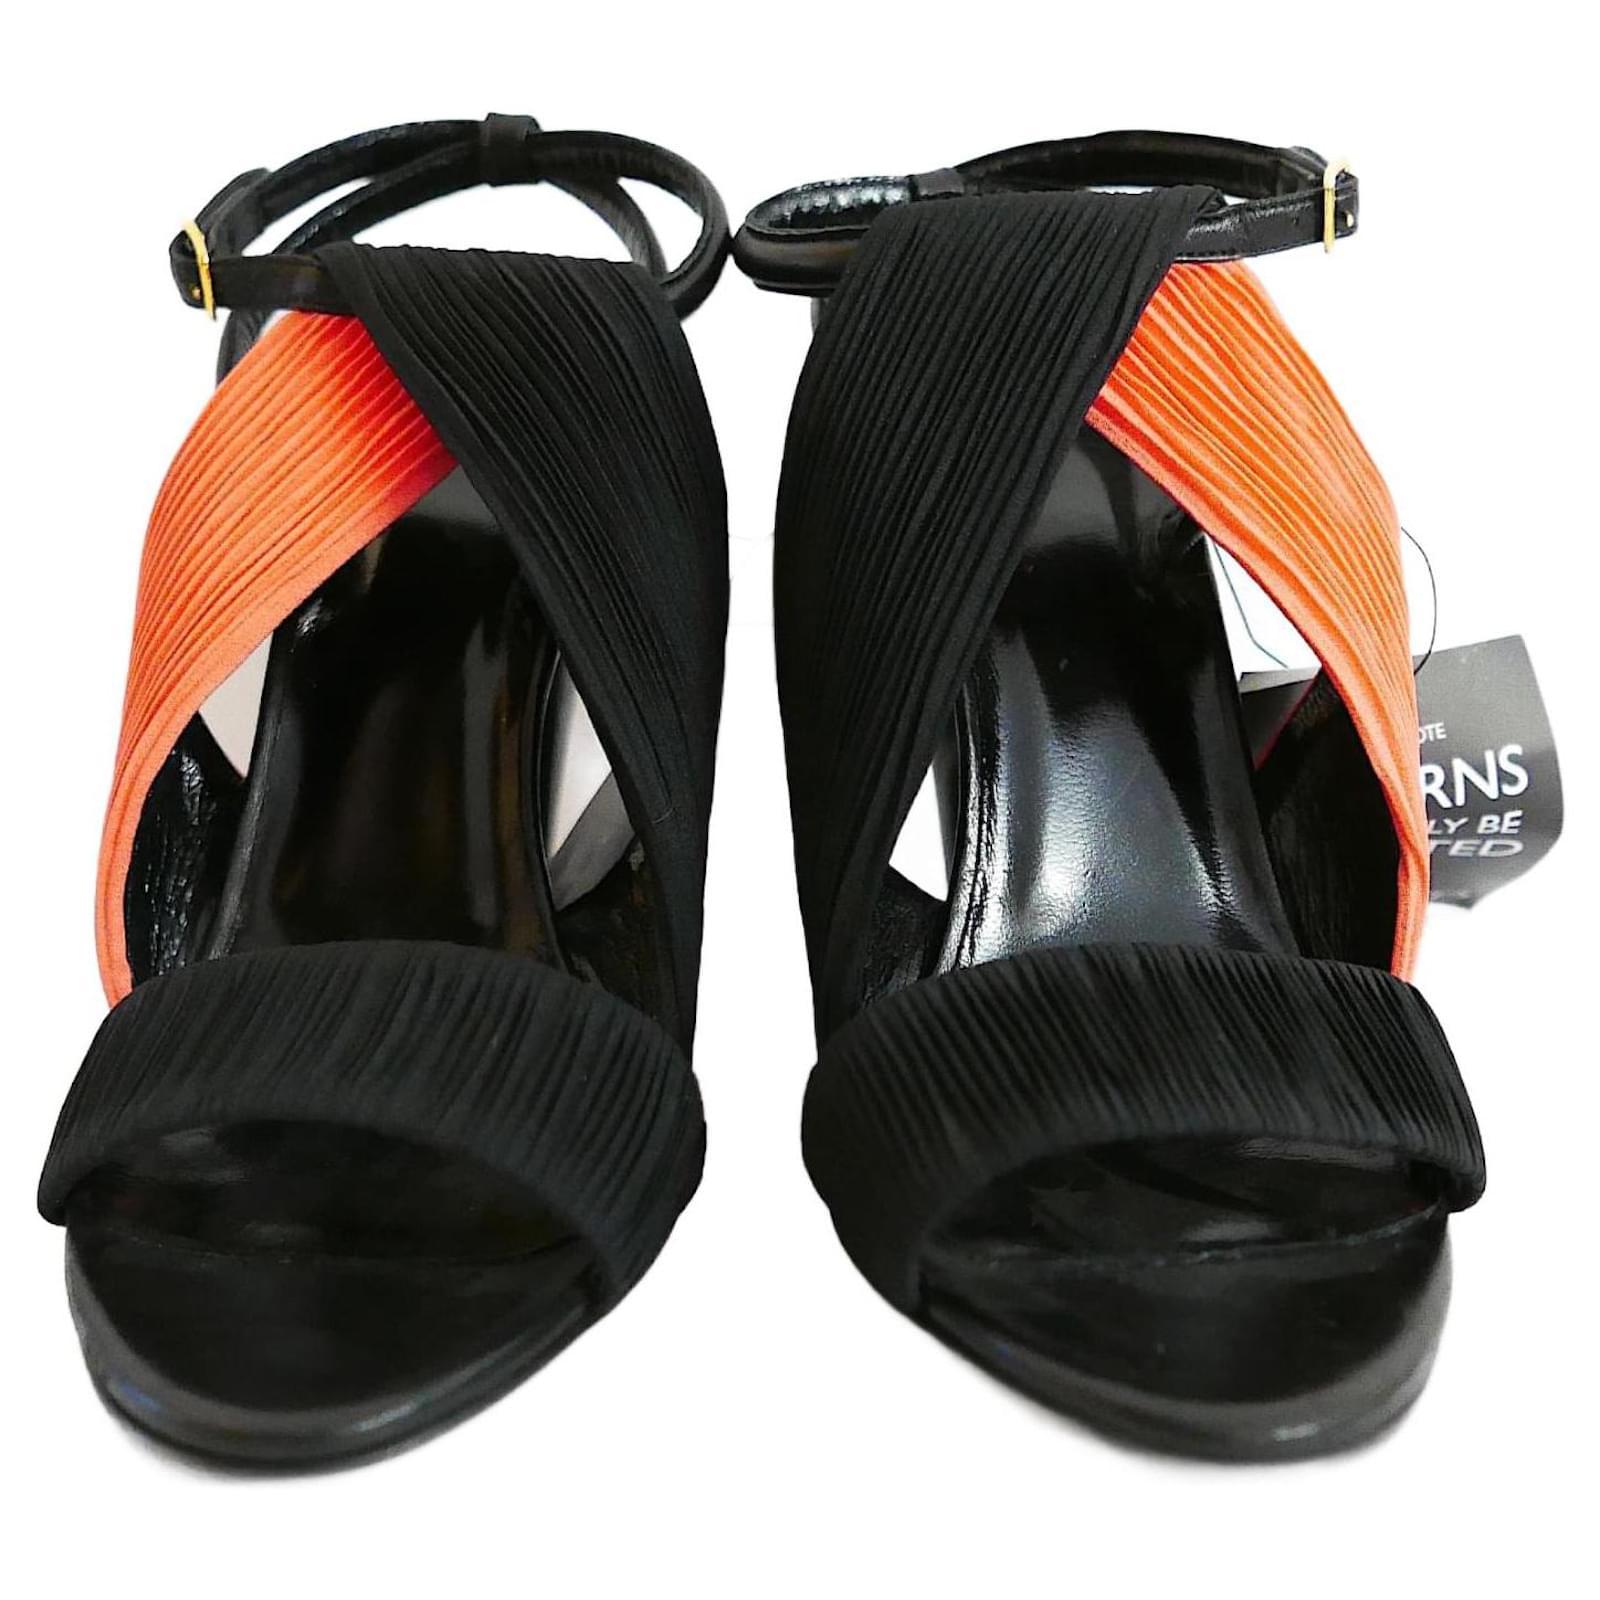 Coolest Pierre Hardy heels, bought for £475 and new with tags. Made from coral and black ruched fabric, they have chunky cone shamed heels and buckle up ankle straps. Size 36.5. Measure approx - 9.5” heel to toe inside and heel is 4.5.
